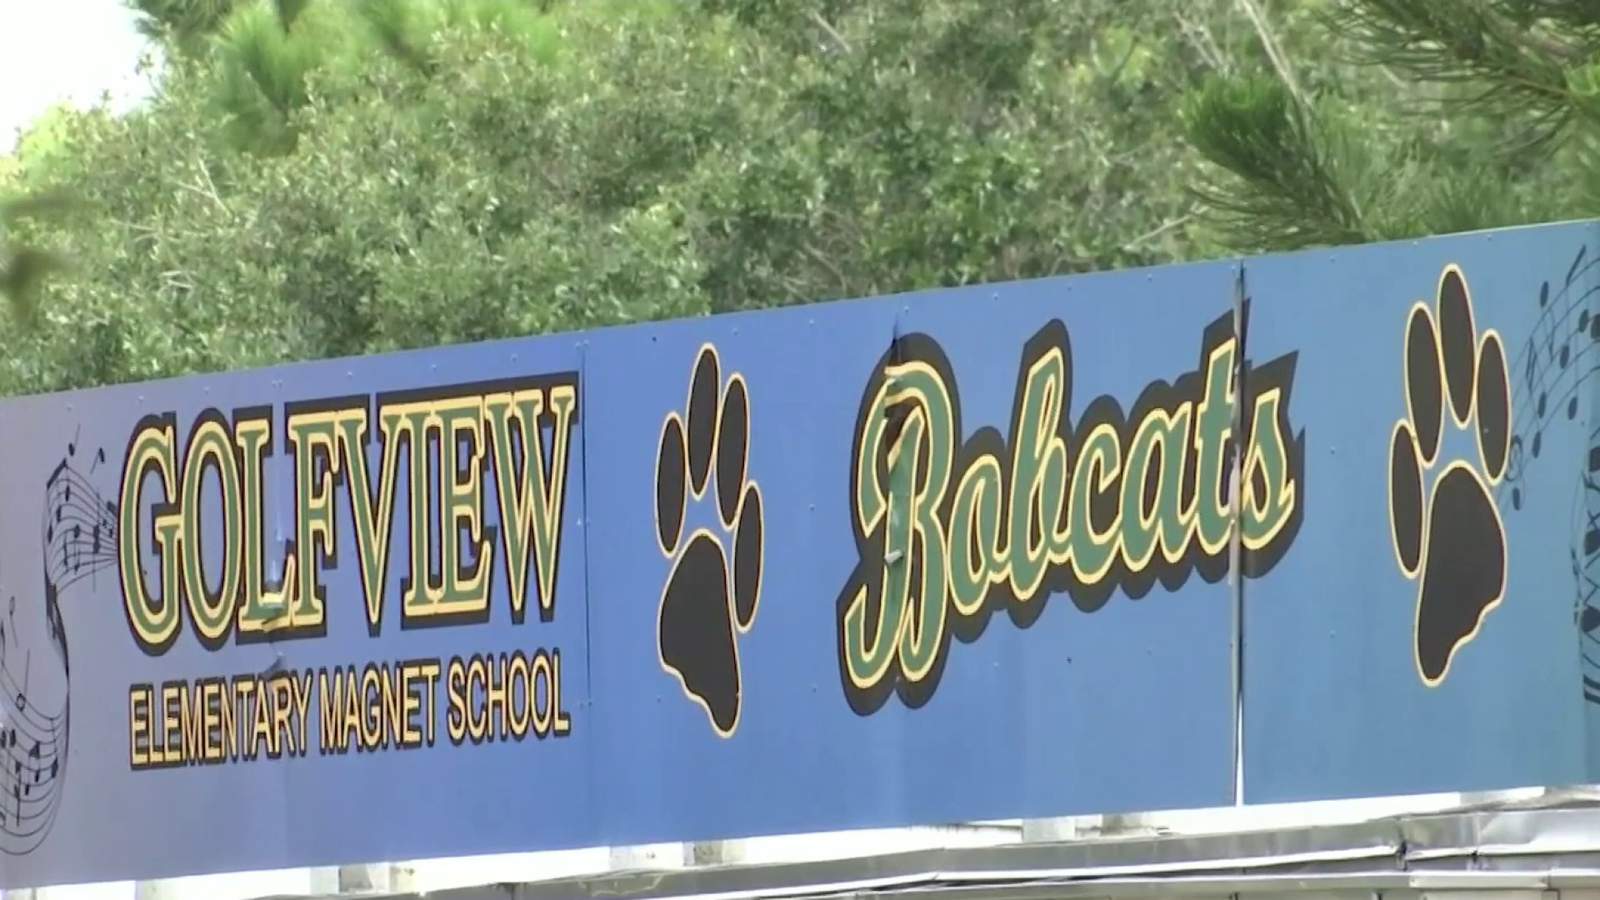 Golfview Elementary to remain closed for another week due to COVID-19 cases